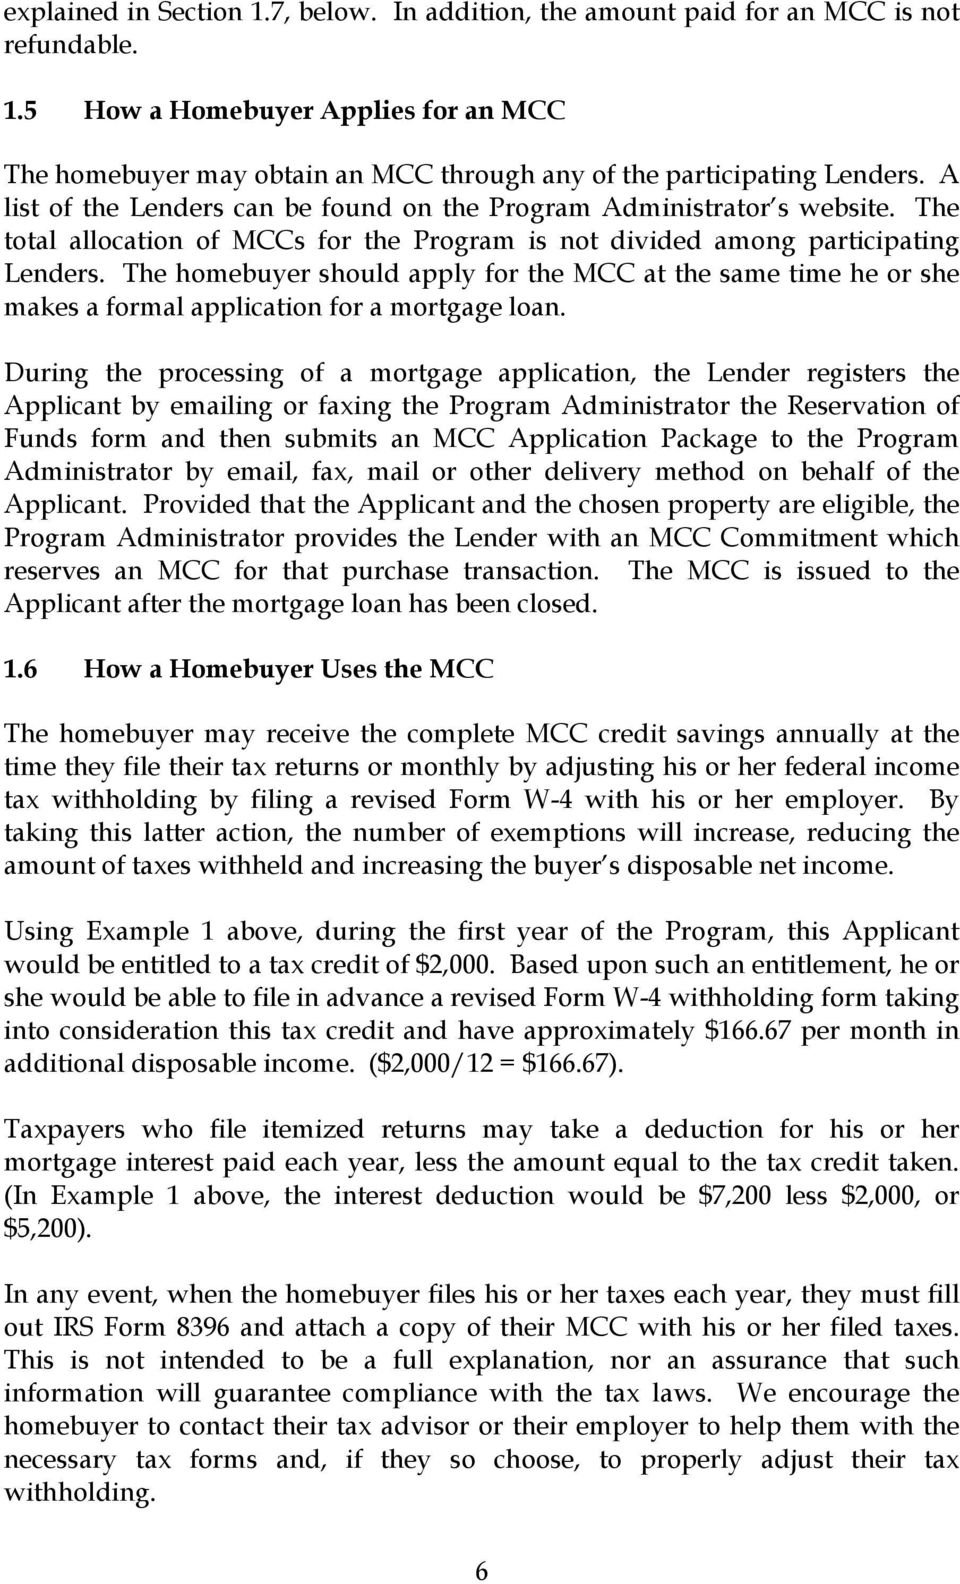 The homebuyer should apply for the MCC at the same time he or she makes a formal application for a mortgage loan.